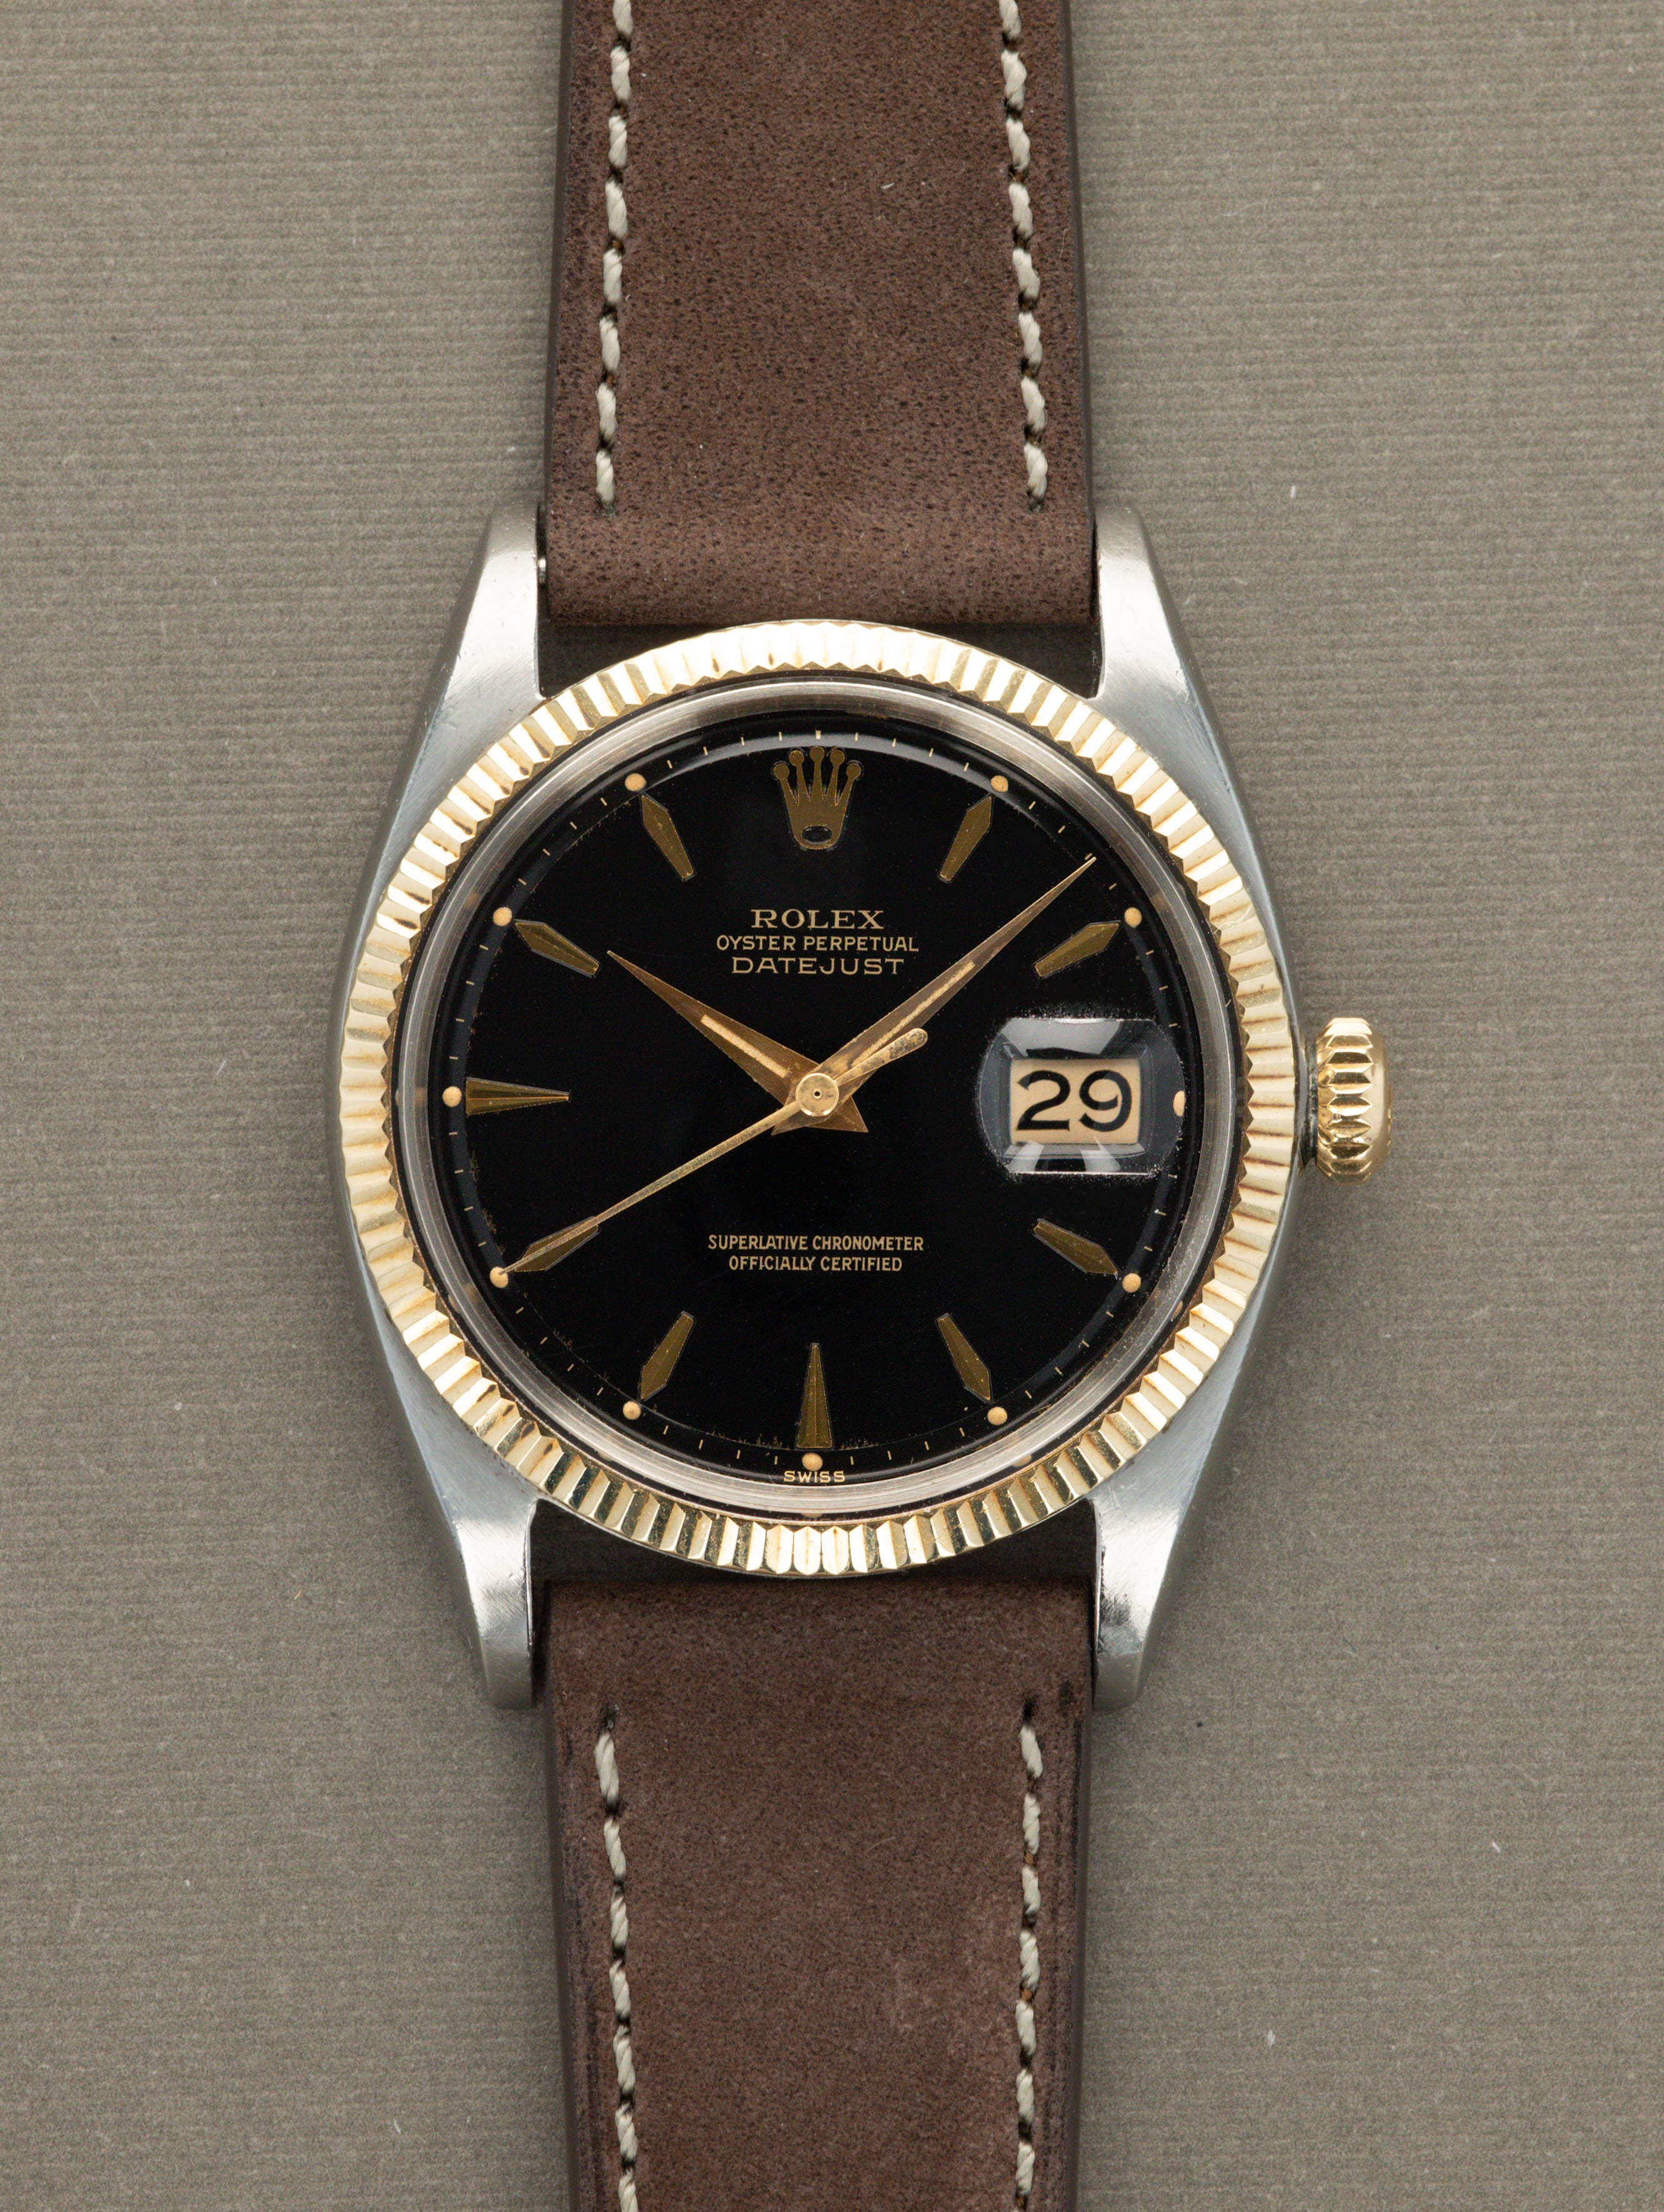 Rolex Datejust Ref. 1601 - Black Gilt Dial with Papers